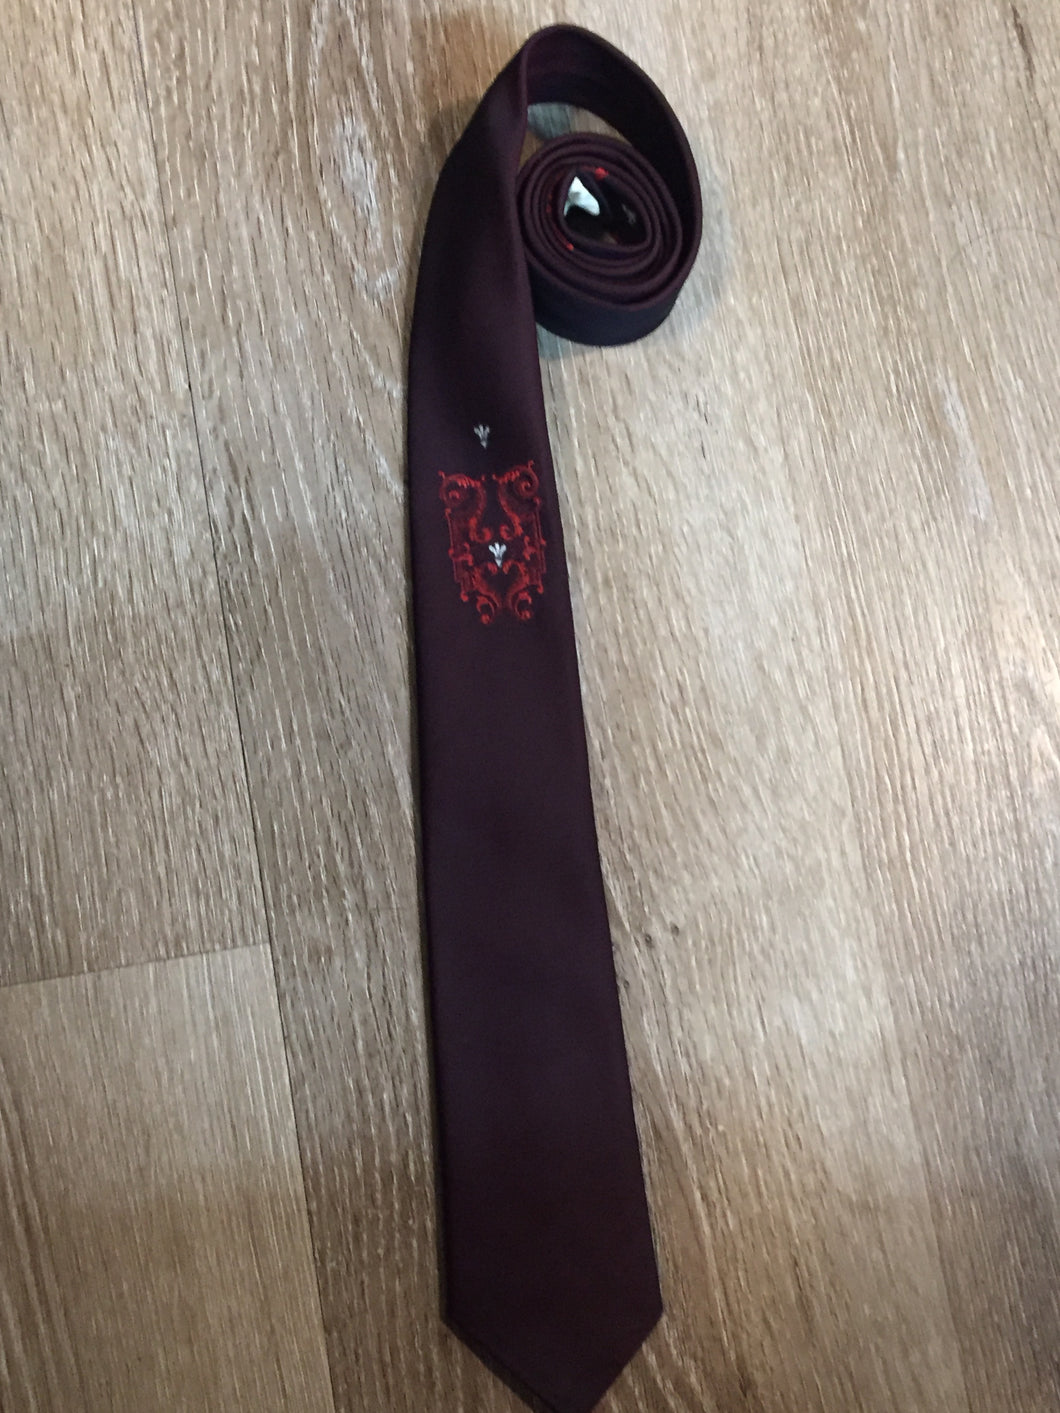 Kingspier Vintage - Creslan tie with burgundy, red and white design. Fibres unknown.

Length: 53” 
Width: 2.5” 

This tie is in excellent condition.